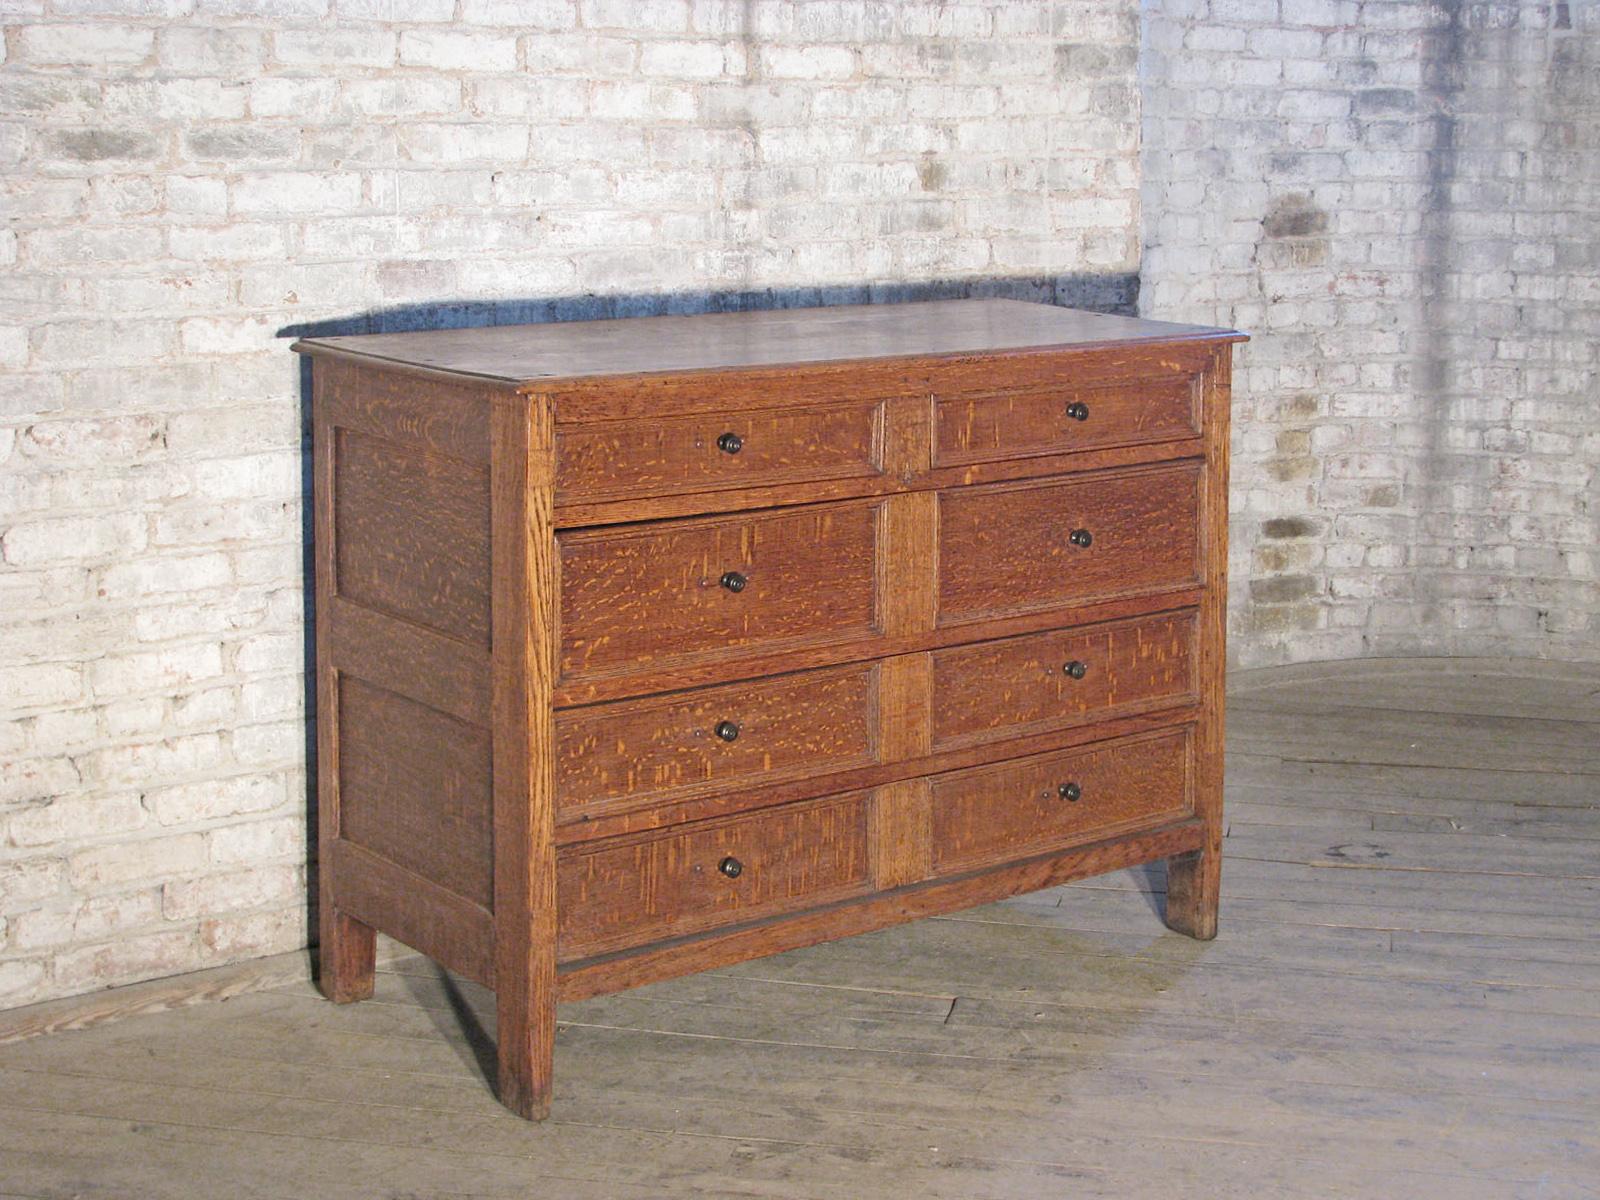 
English chest of drawers, Charles II, late 17th century, made of blond oak and left un-stained, which gives this commode a striking, unique 